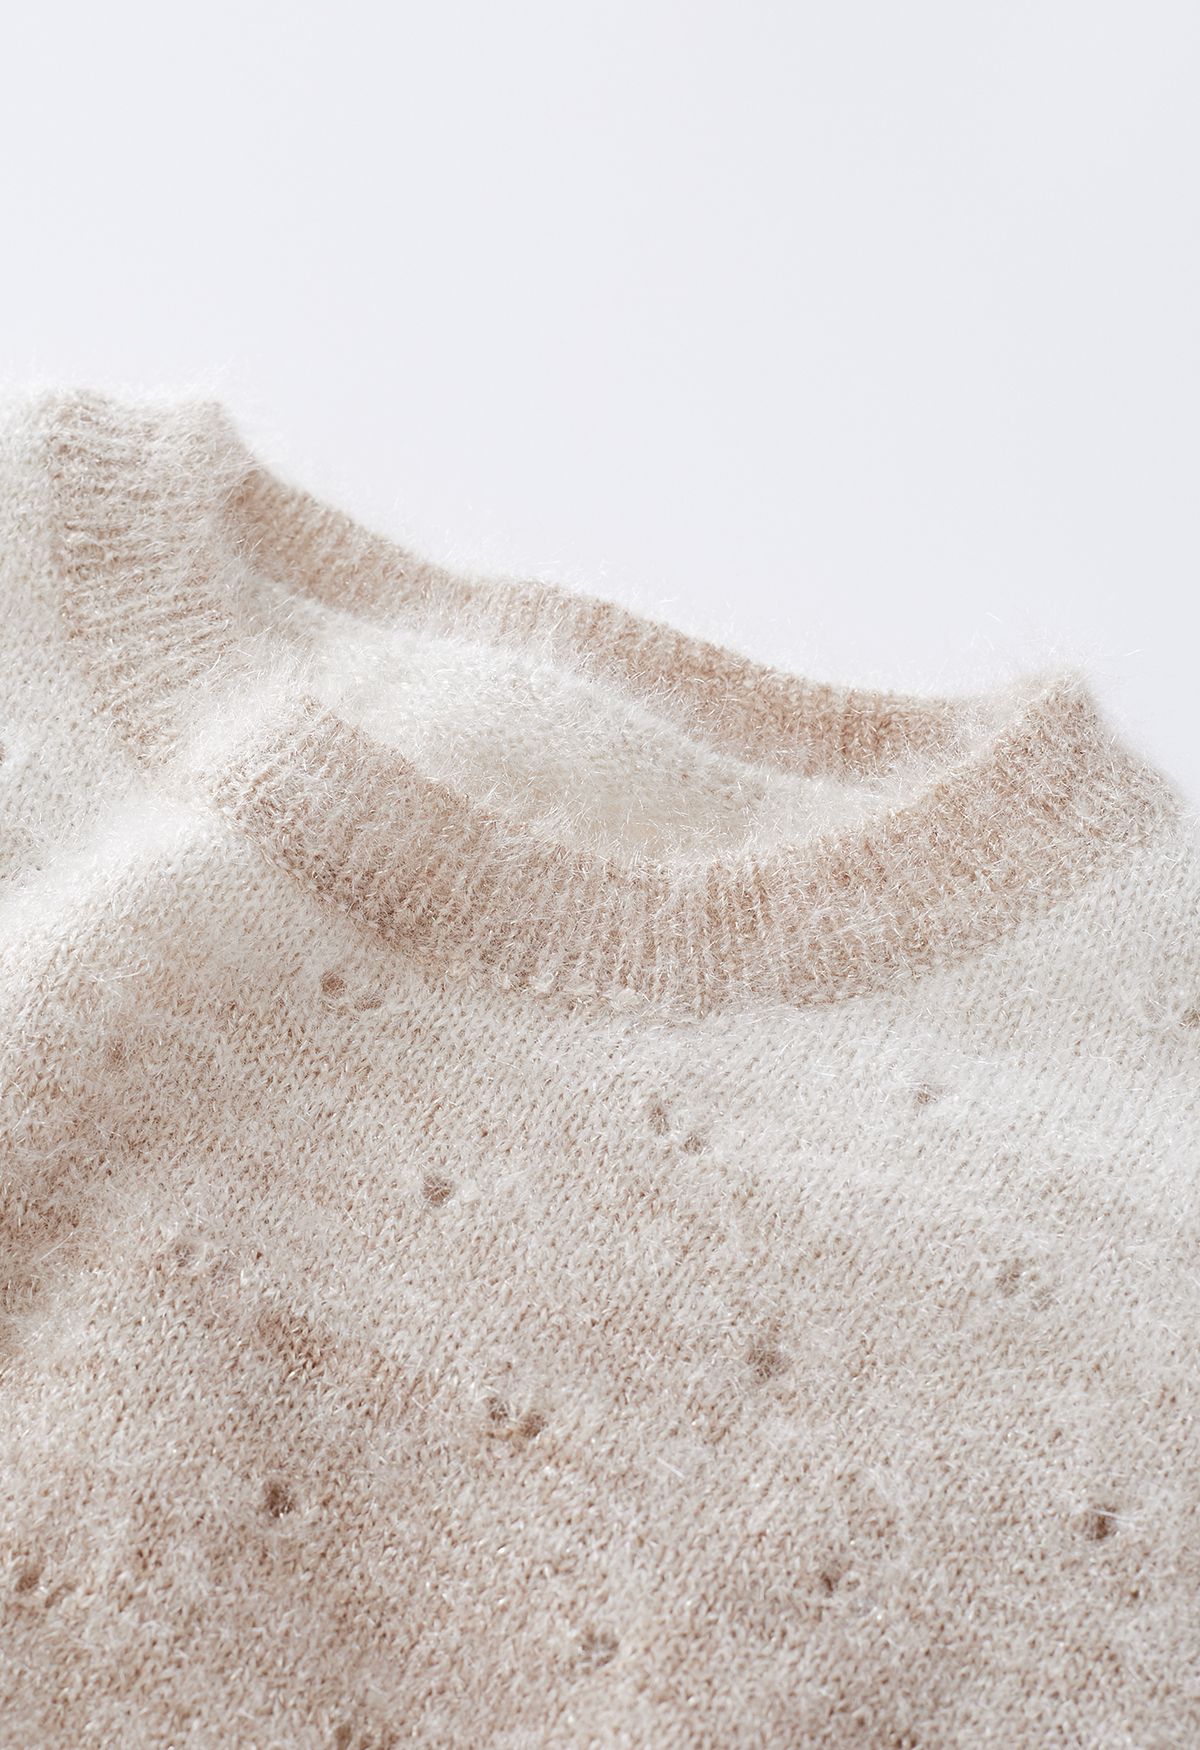 Ombre Eyelet Fuzzy Crop Sweater بلون أسمر فاتح